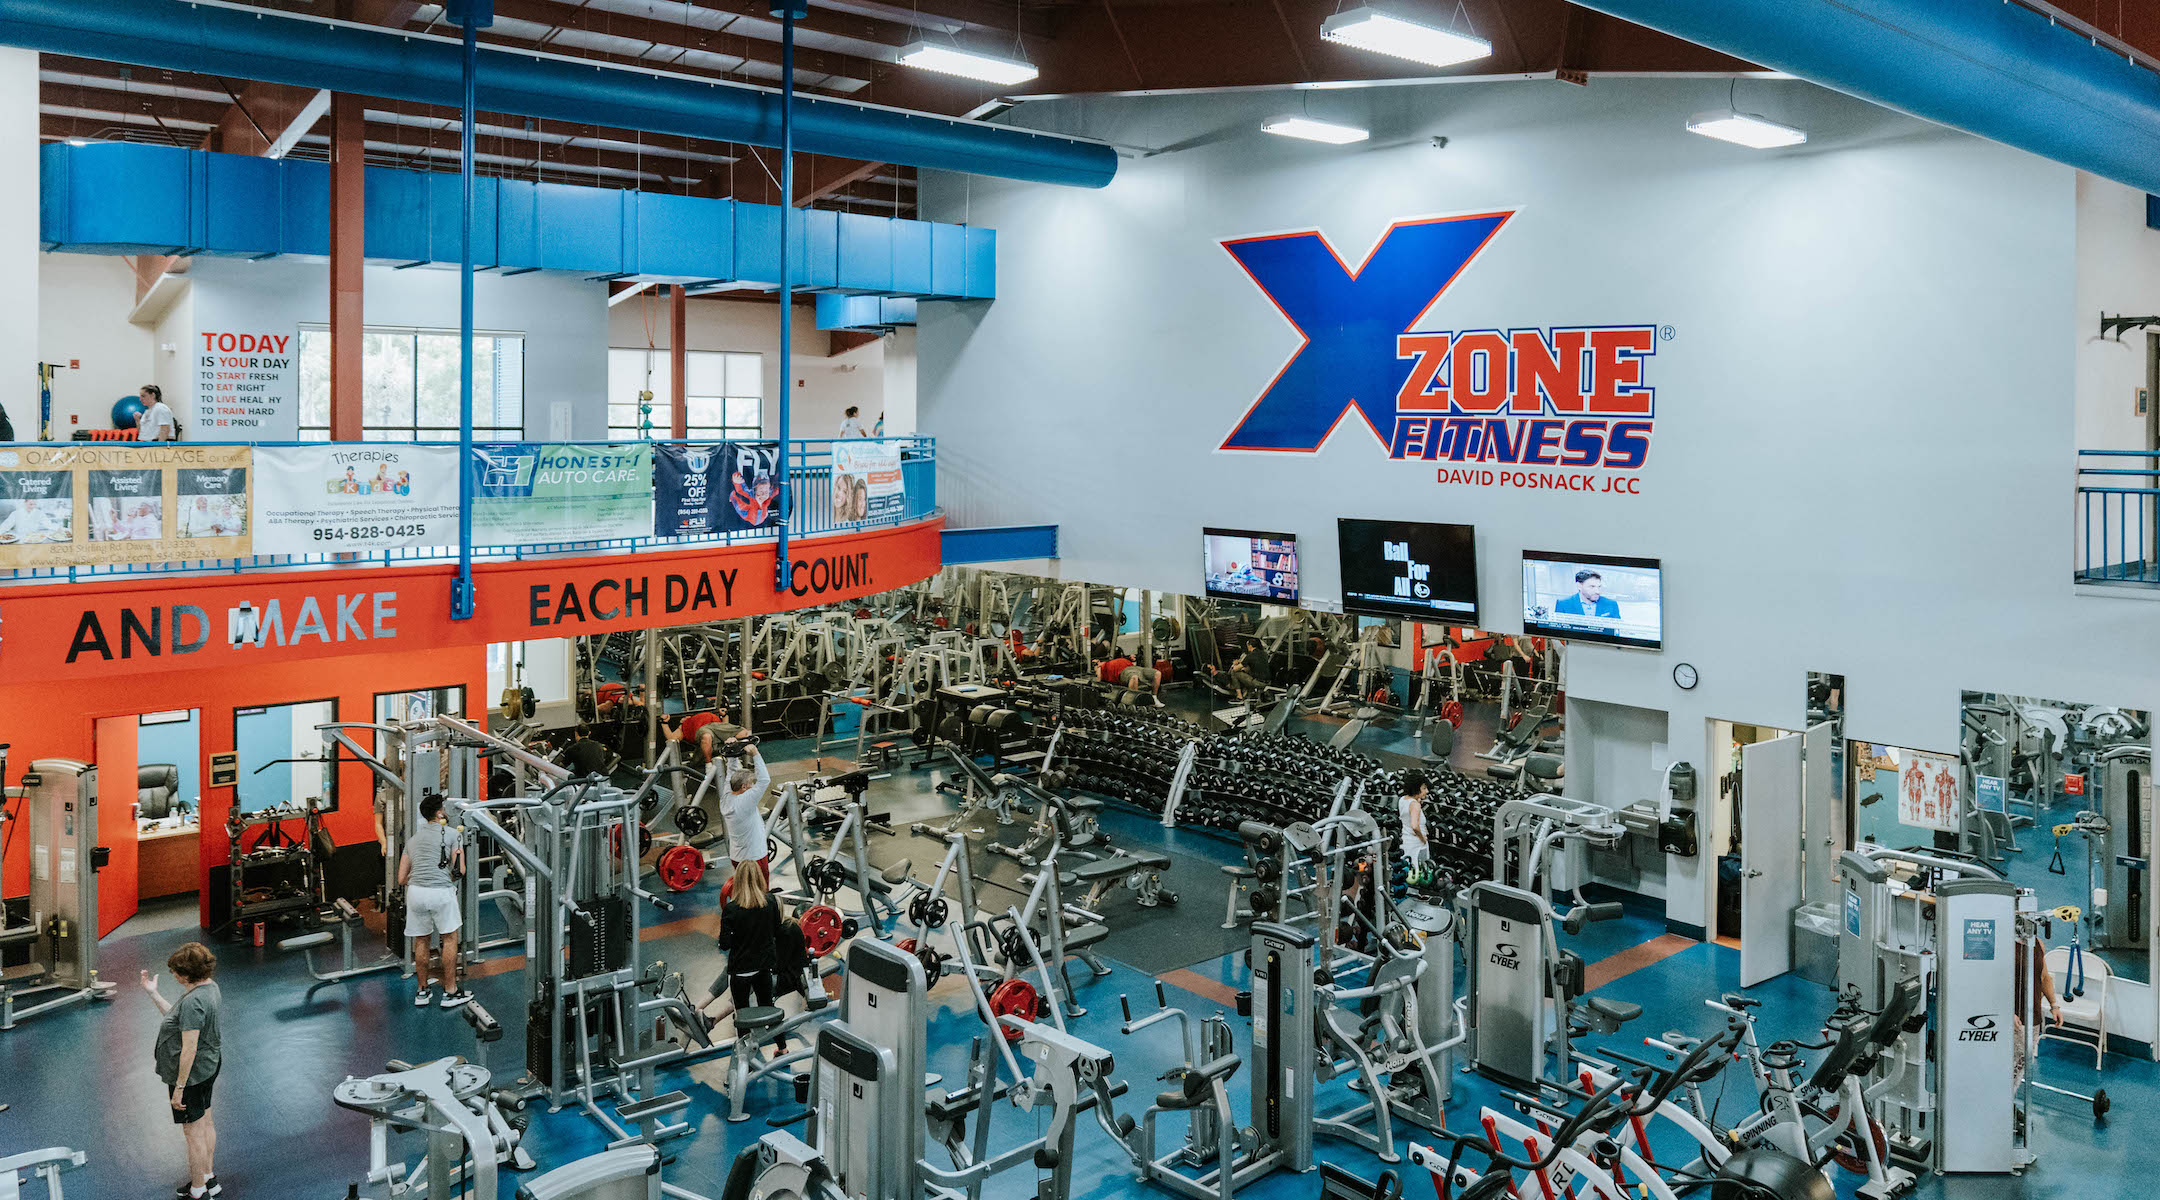 The fitness center at the David Posnack JCC has not yet been allowed to reopen, but when it does, equipment will be six feet apart and the center will be cleaned after each hour of use. (Courtesy of the David Posnack JCC)